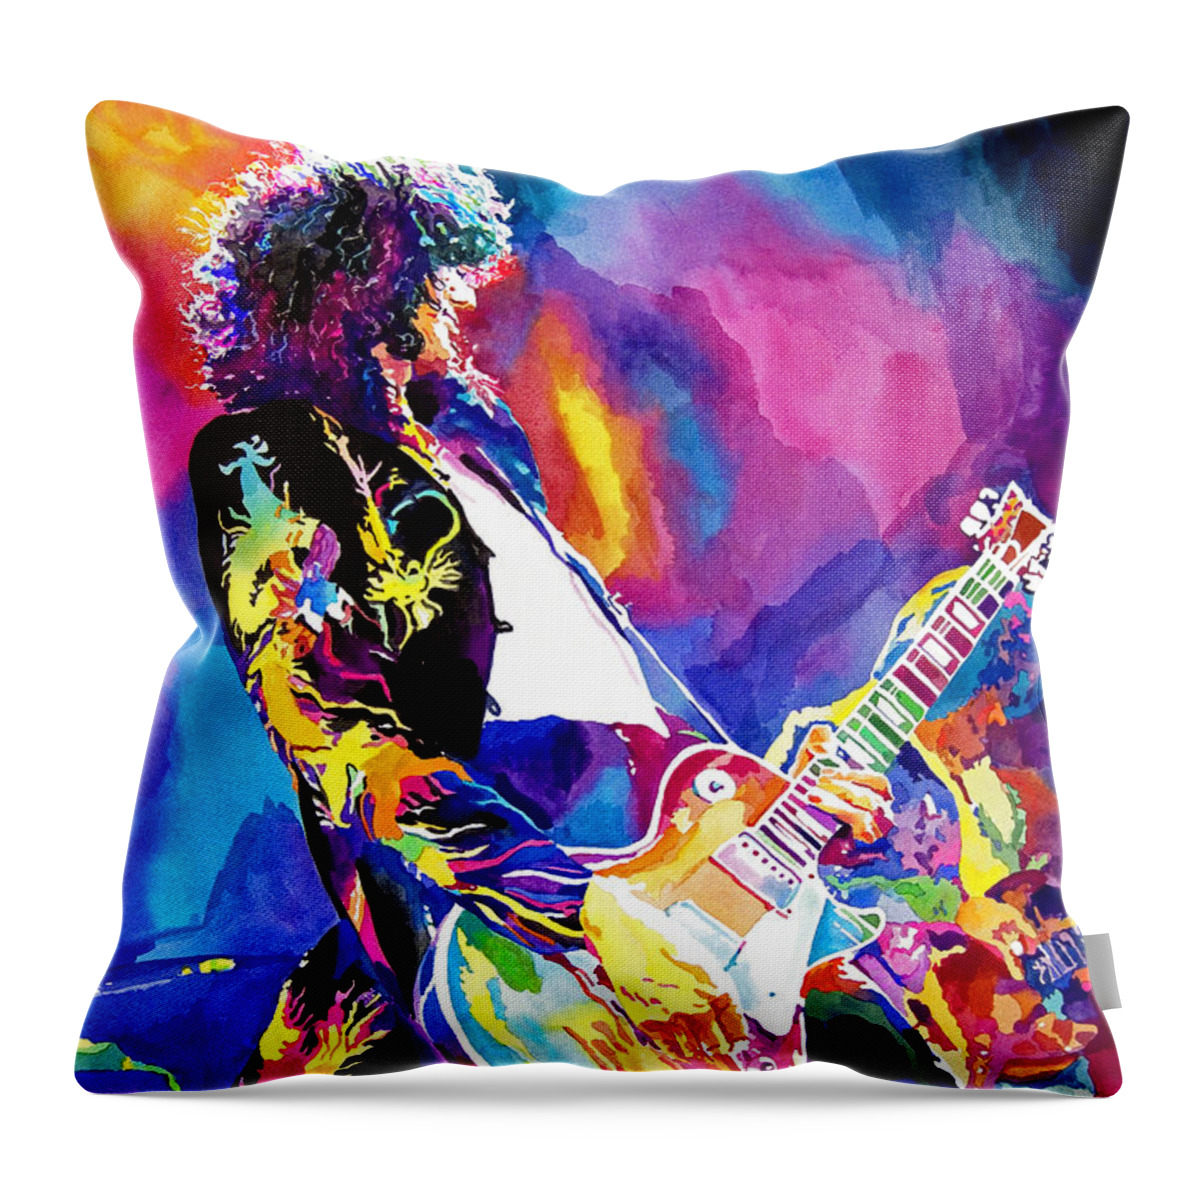 Jimmy Page Artwork Throw Pillow featuring the painting Monolithic Riff - Jimmy Page by David Lloyd Glover